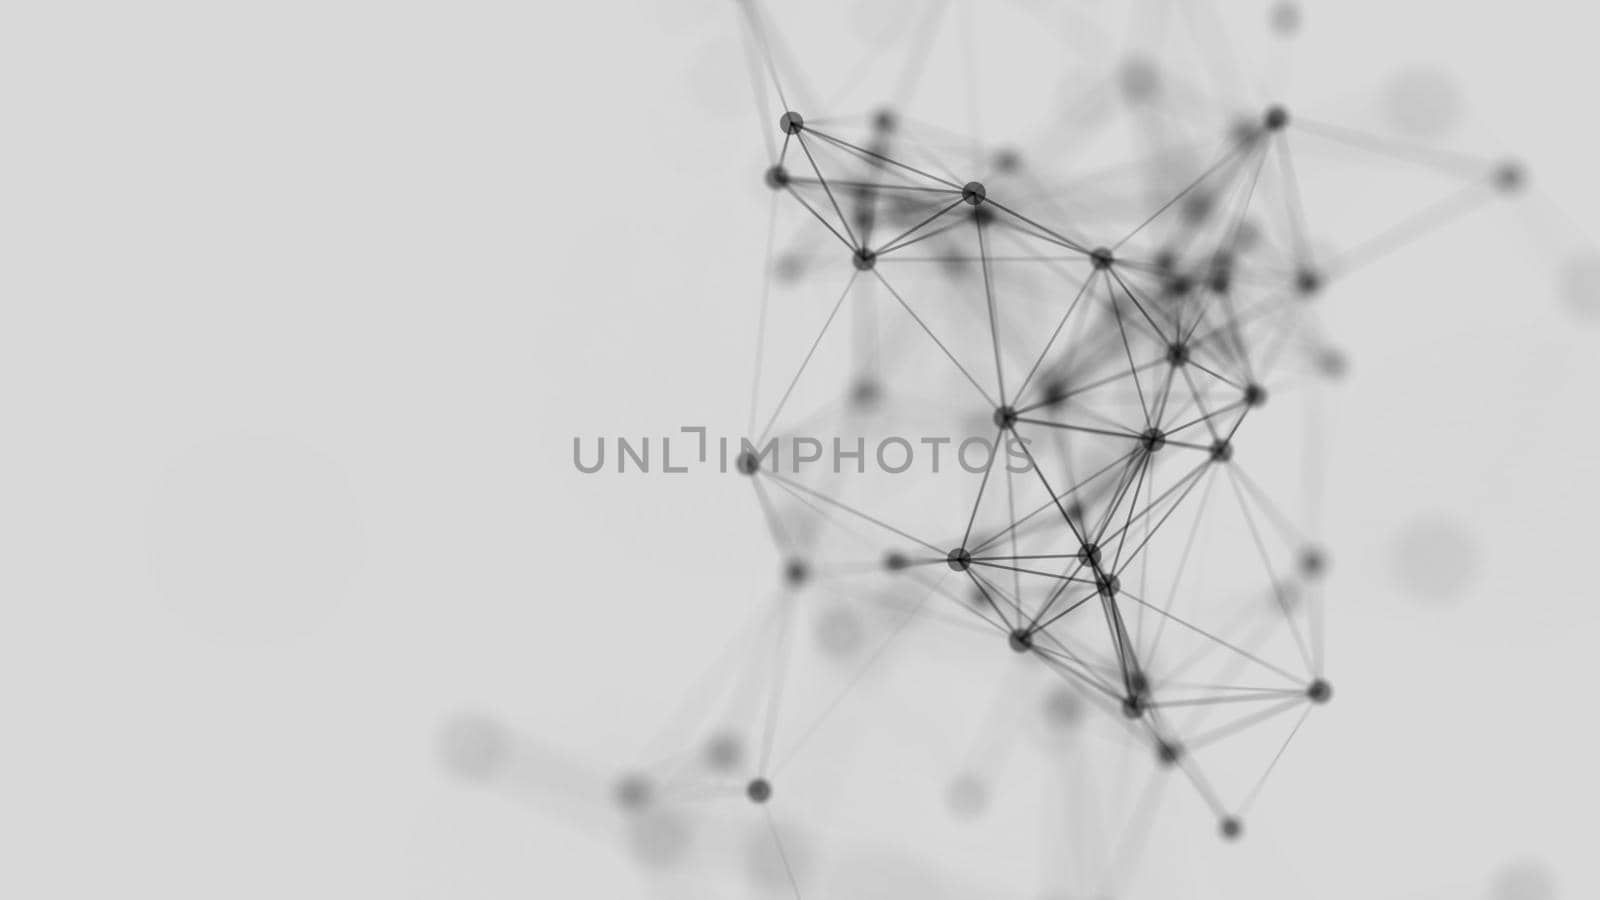 Abstract background with dots. 3d rendering. Technology shape with lines and dots. Fantastic concept. Block chain.